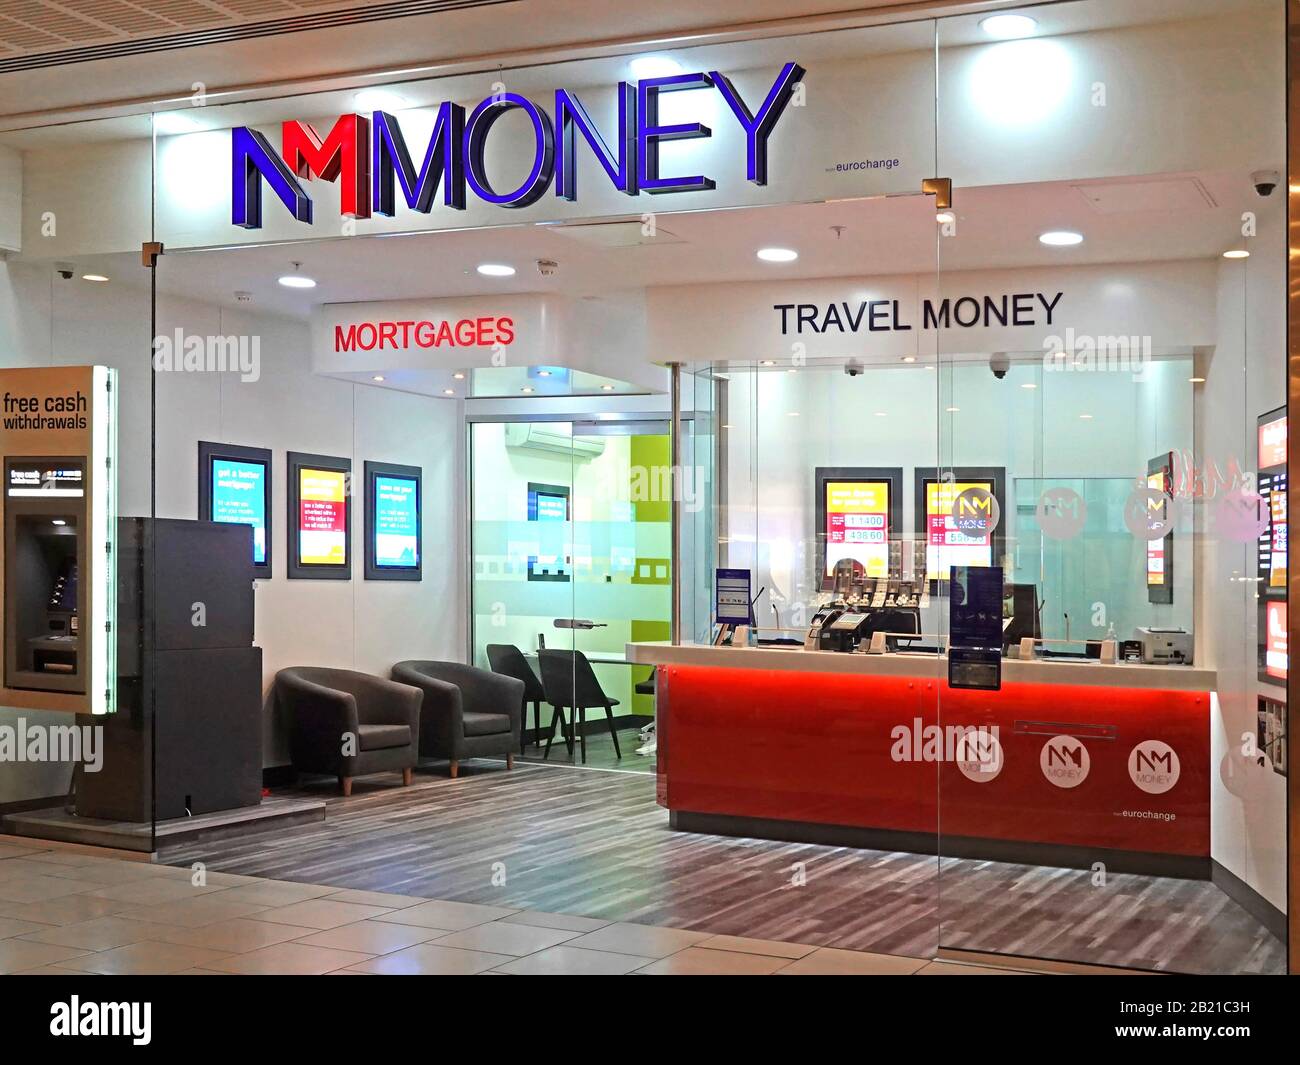 Shop front & sign for NM Money business dealing in Travel Money & Mortgages part of NoteMachine Group ATM & eurochange Intu Lakeside Essex England UK Stock Photo